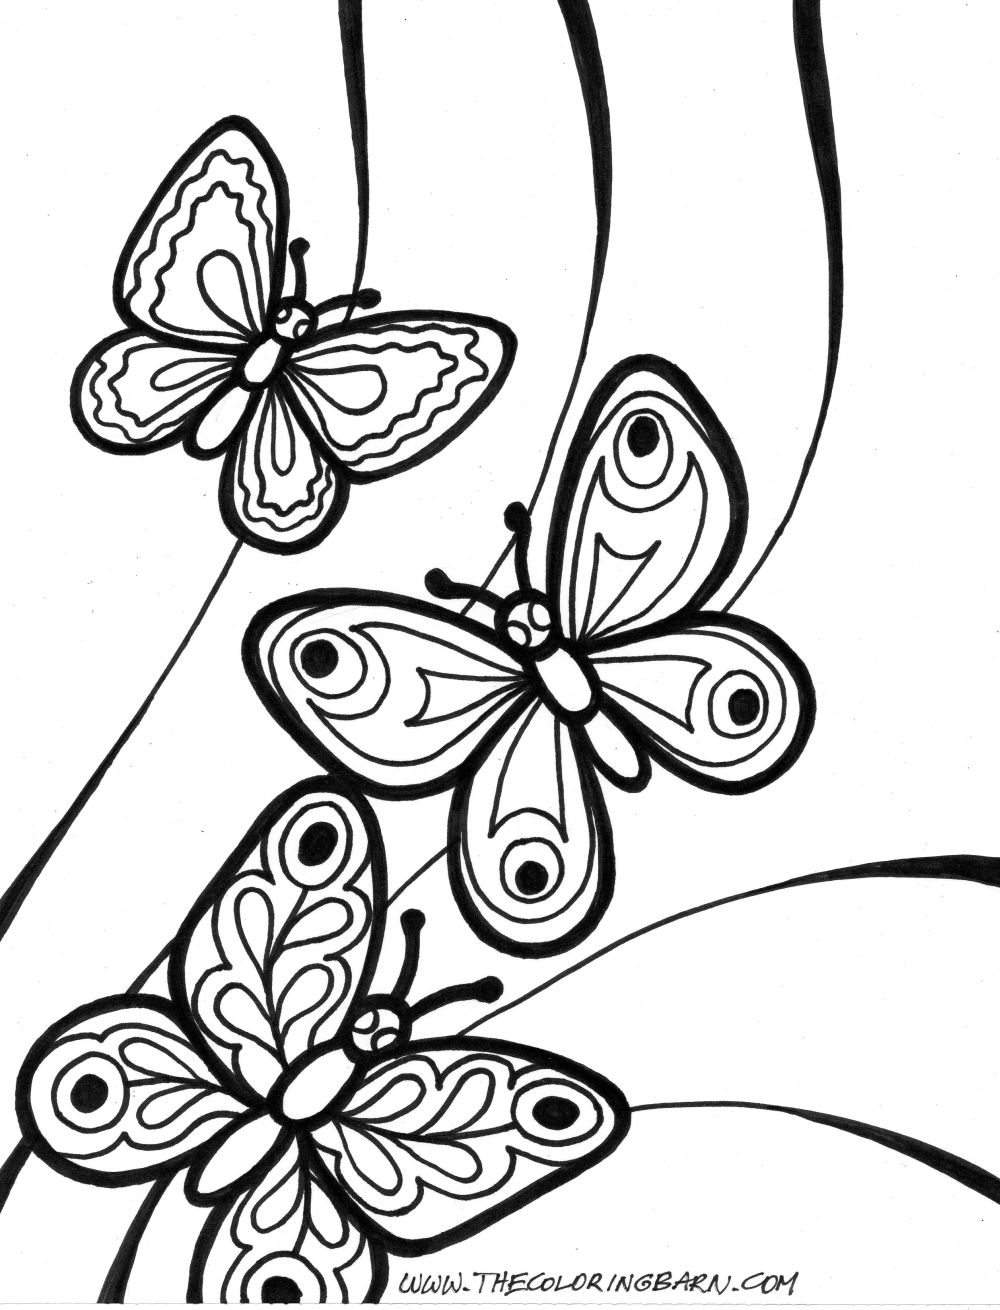  Butterfly coloring pages | Butterfly coloring pages for kids | #15